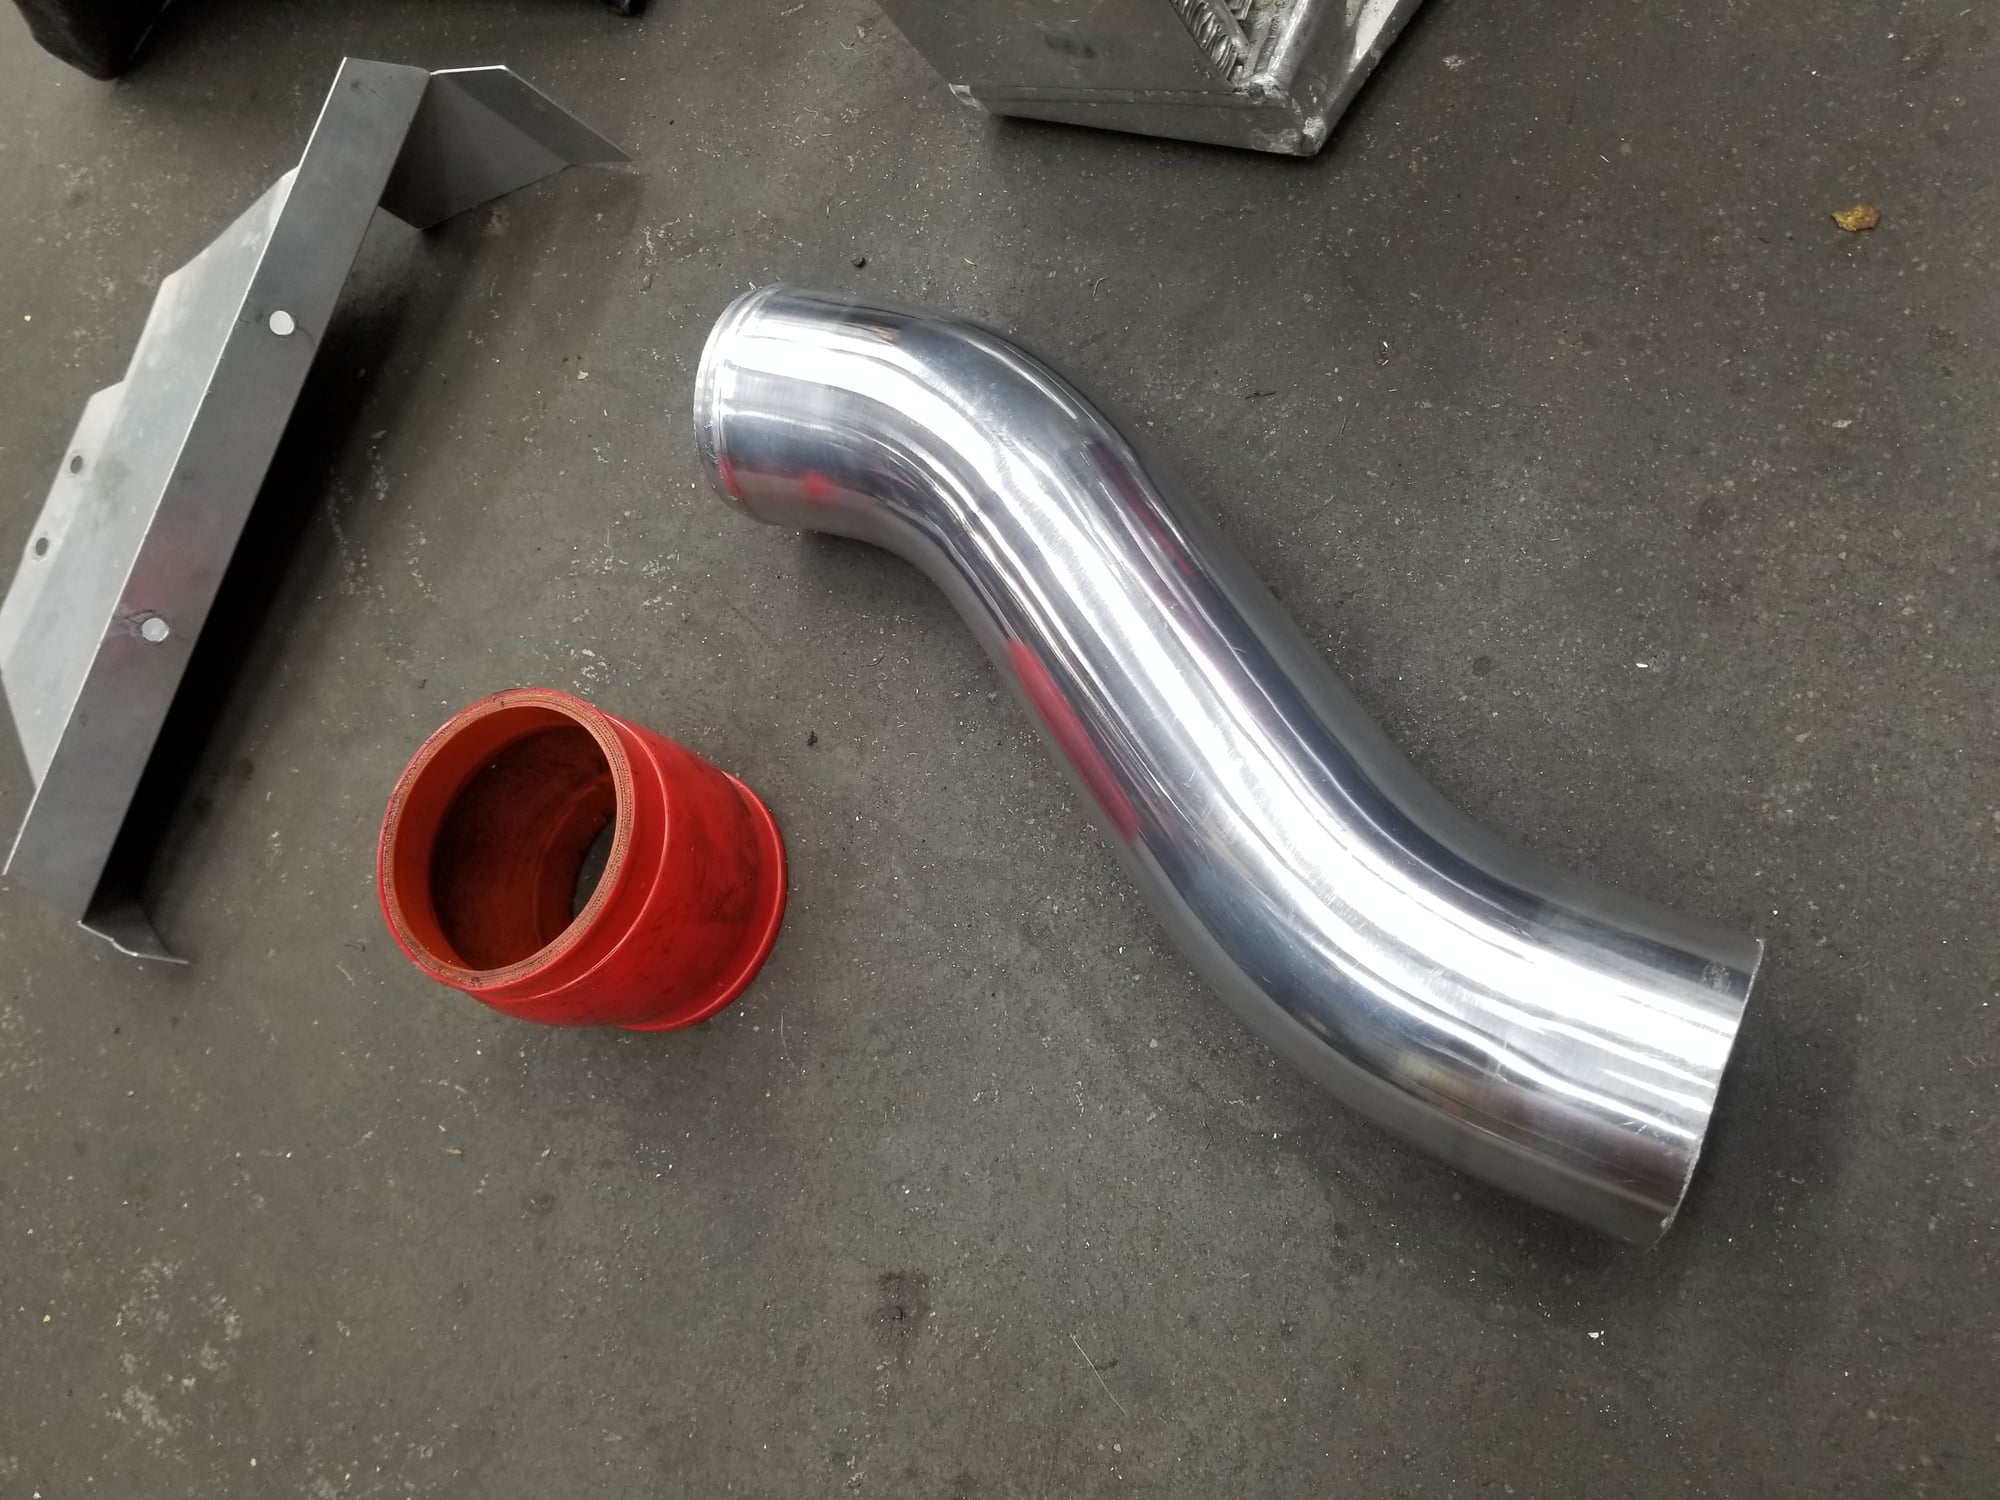 Engine - Intake/Fuel - FD greddy SMIC polished w/ pipes, silicone couplers, custom duct - Used - Morristown, TN 37814, United States